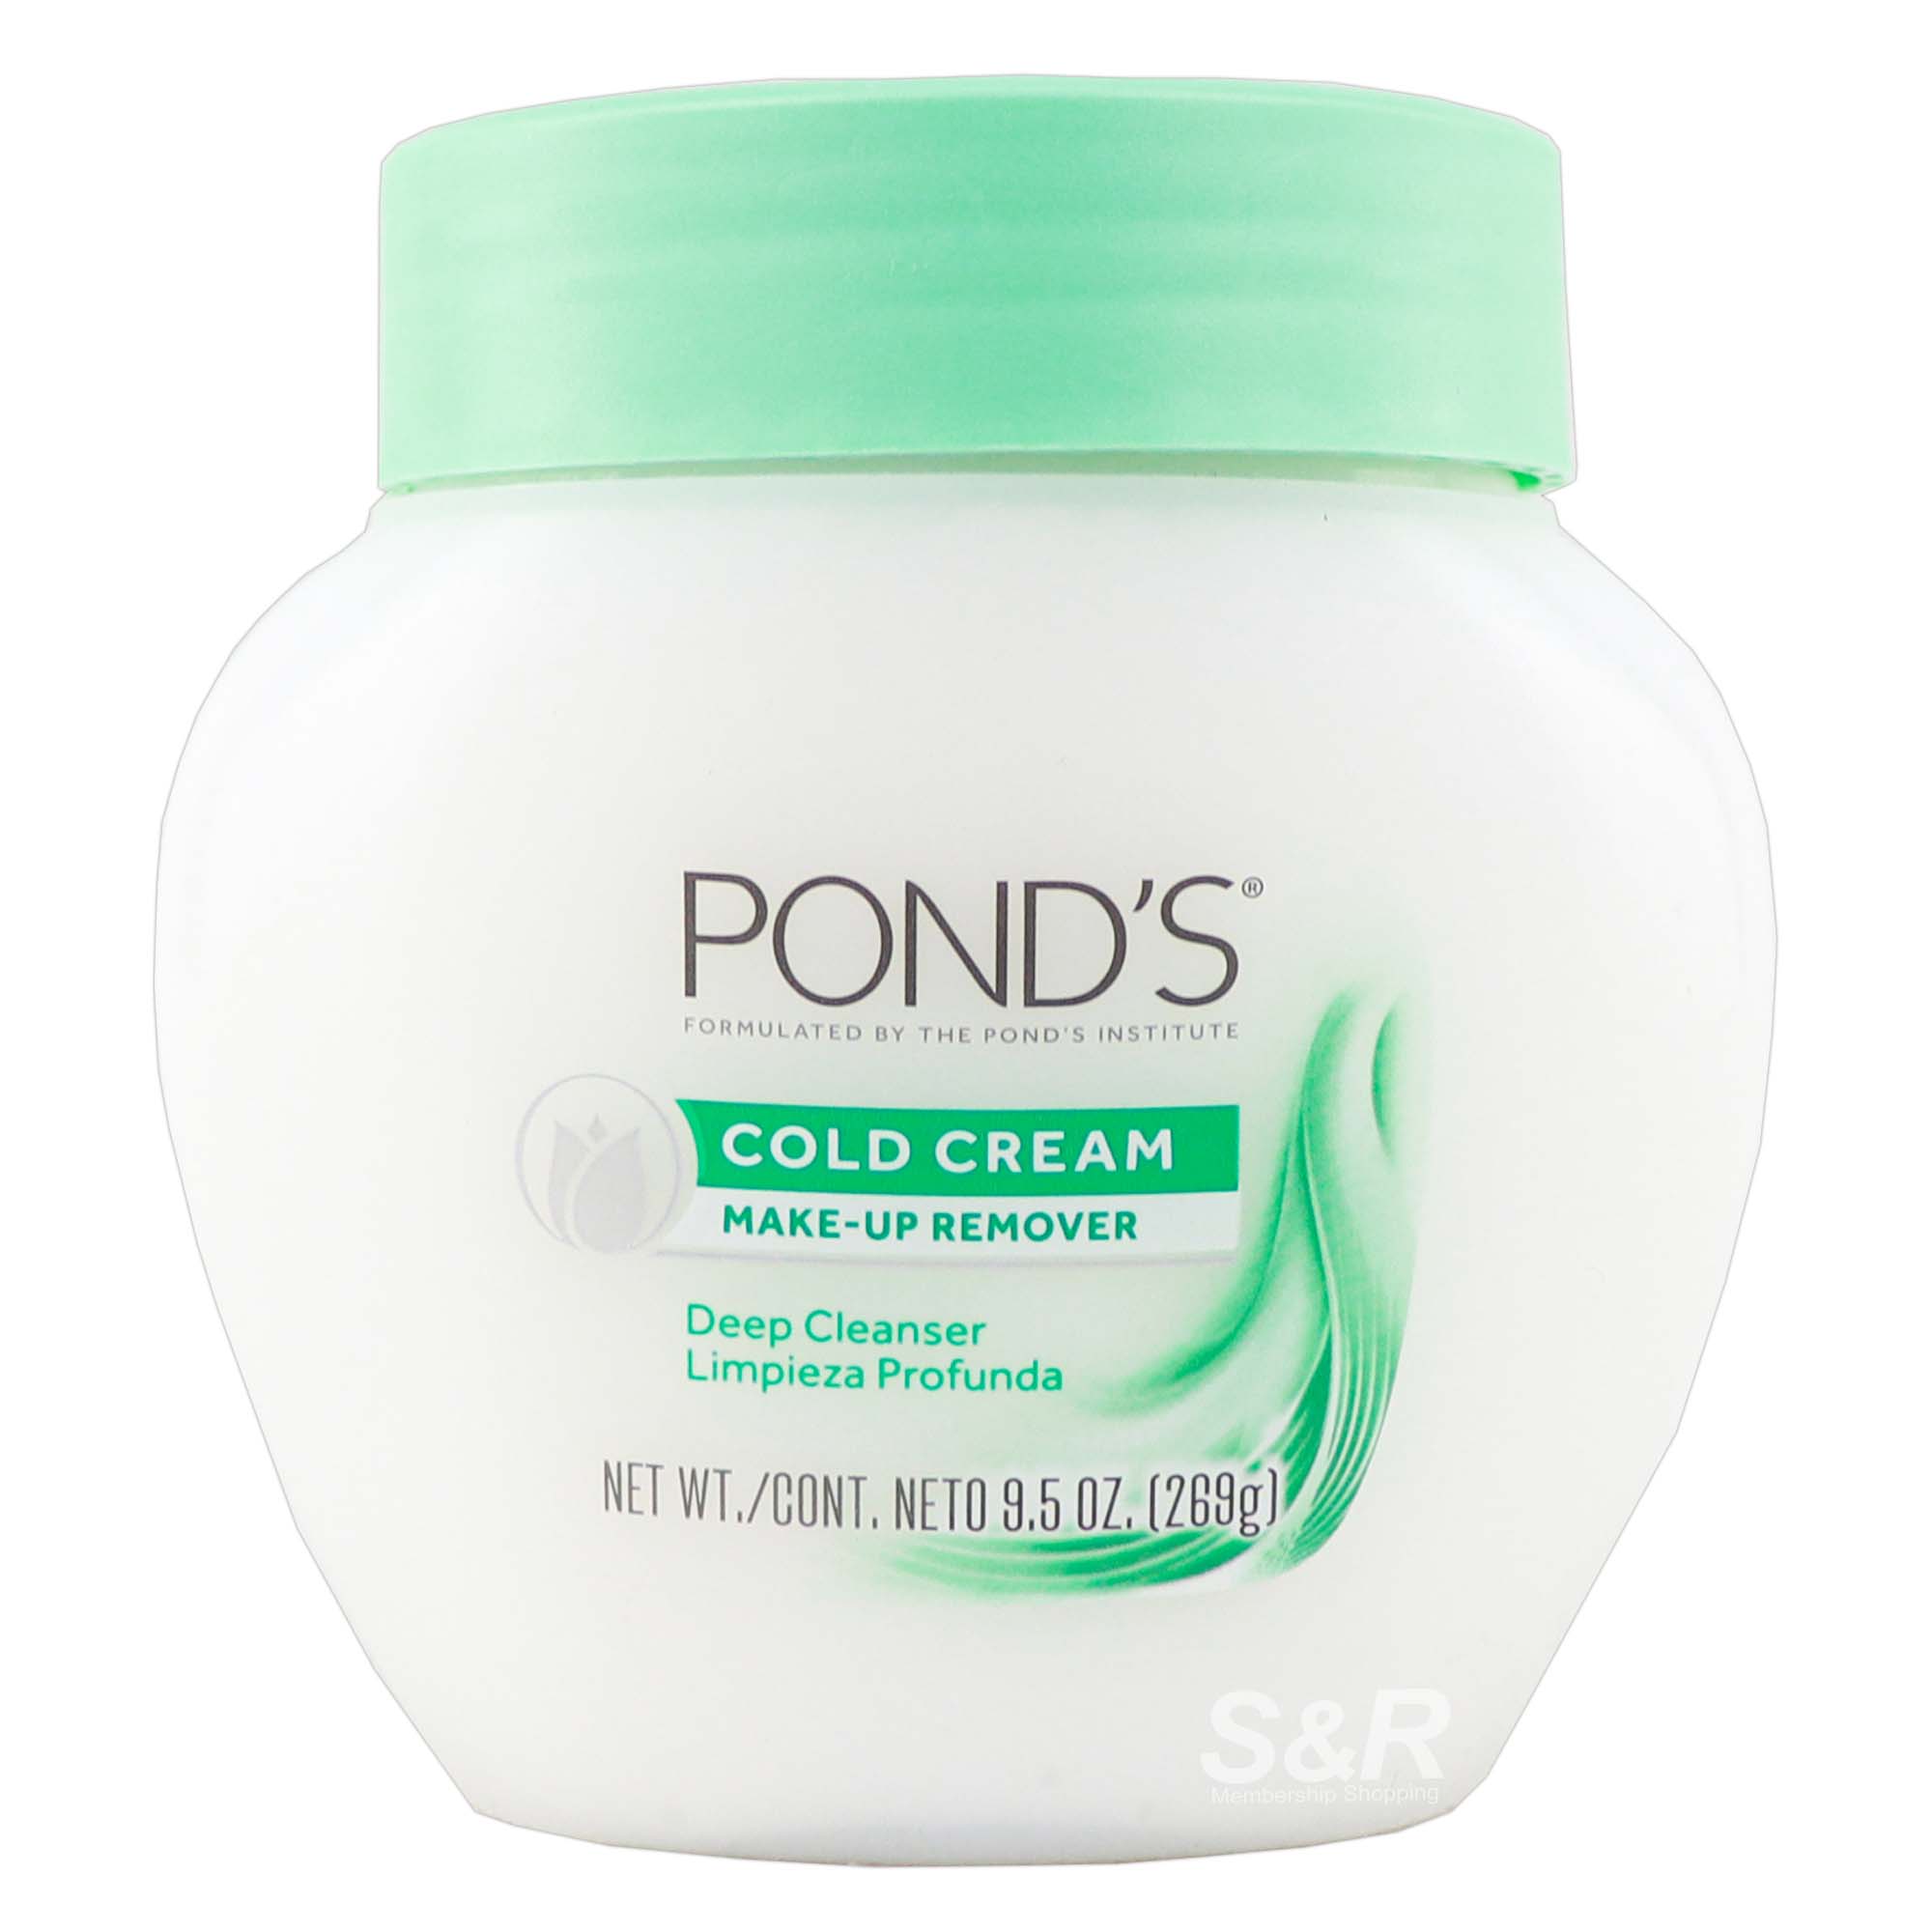 Pond's Cold Cream Make-Up Remover Deep Cleanser 269g